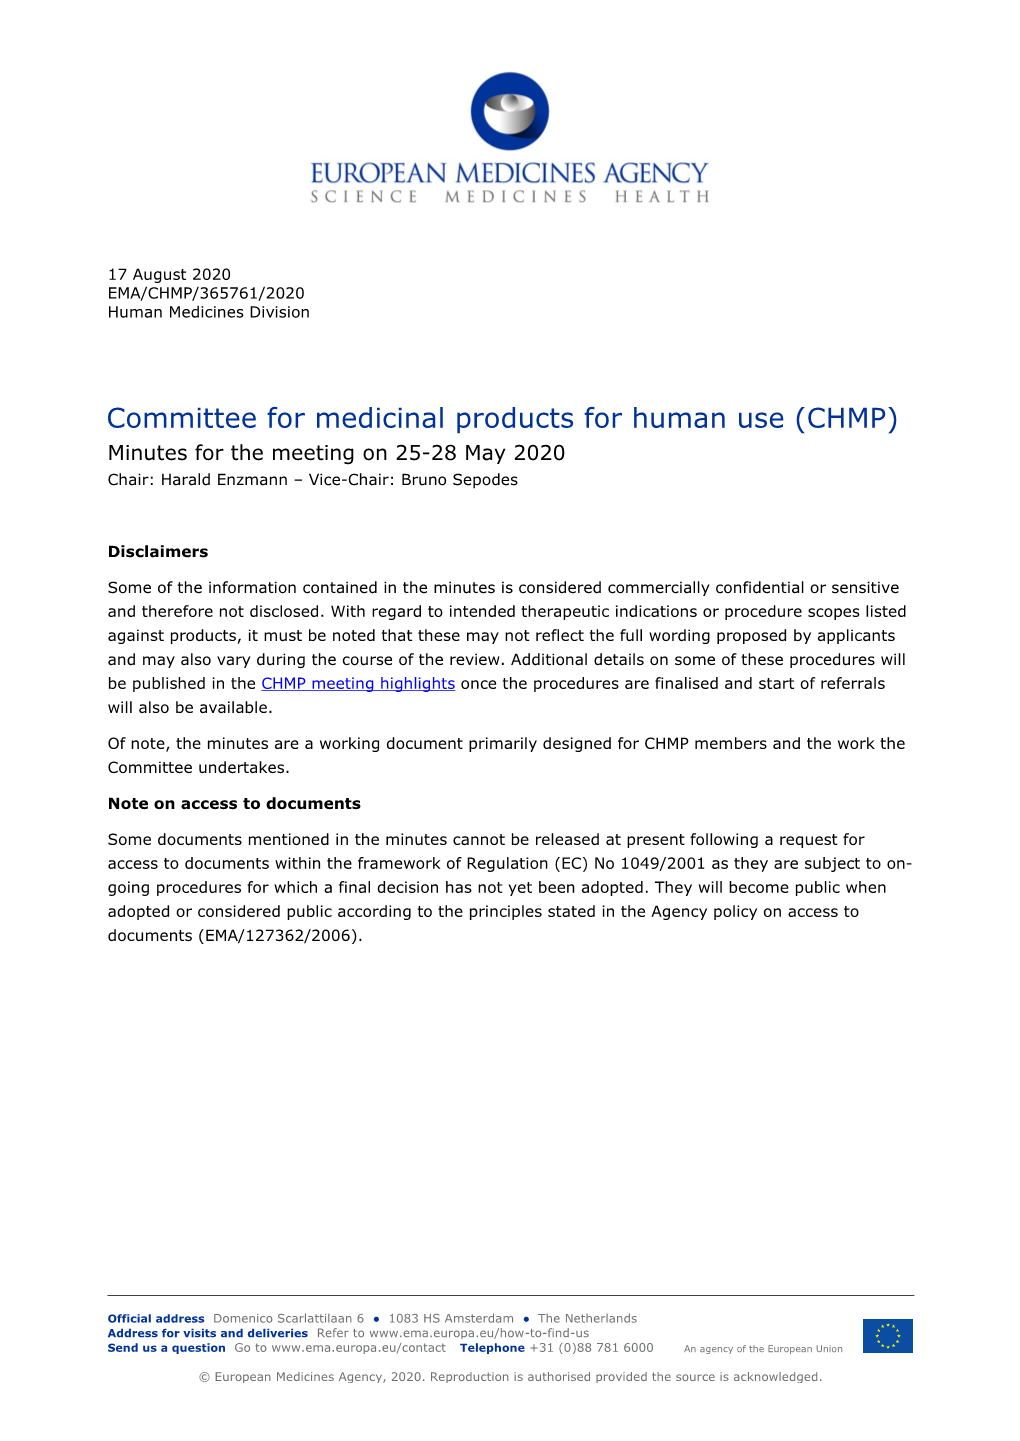 Committee for Medicinal Products for Human Use (CHMP) Minutes for the Meeting on 25-28 May 2020 Chair: Harald Enzmann – Vice-Chair: Bruno Sepodes